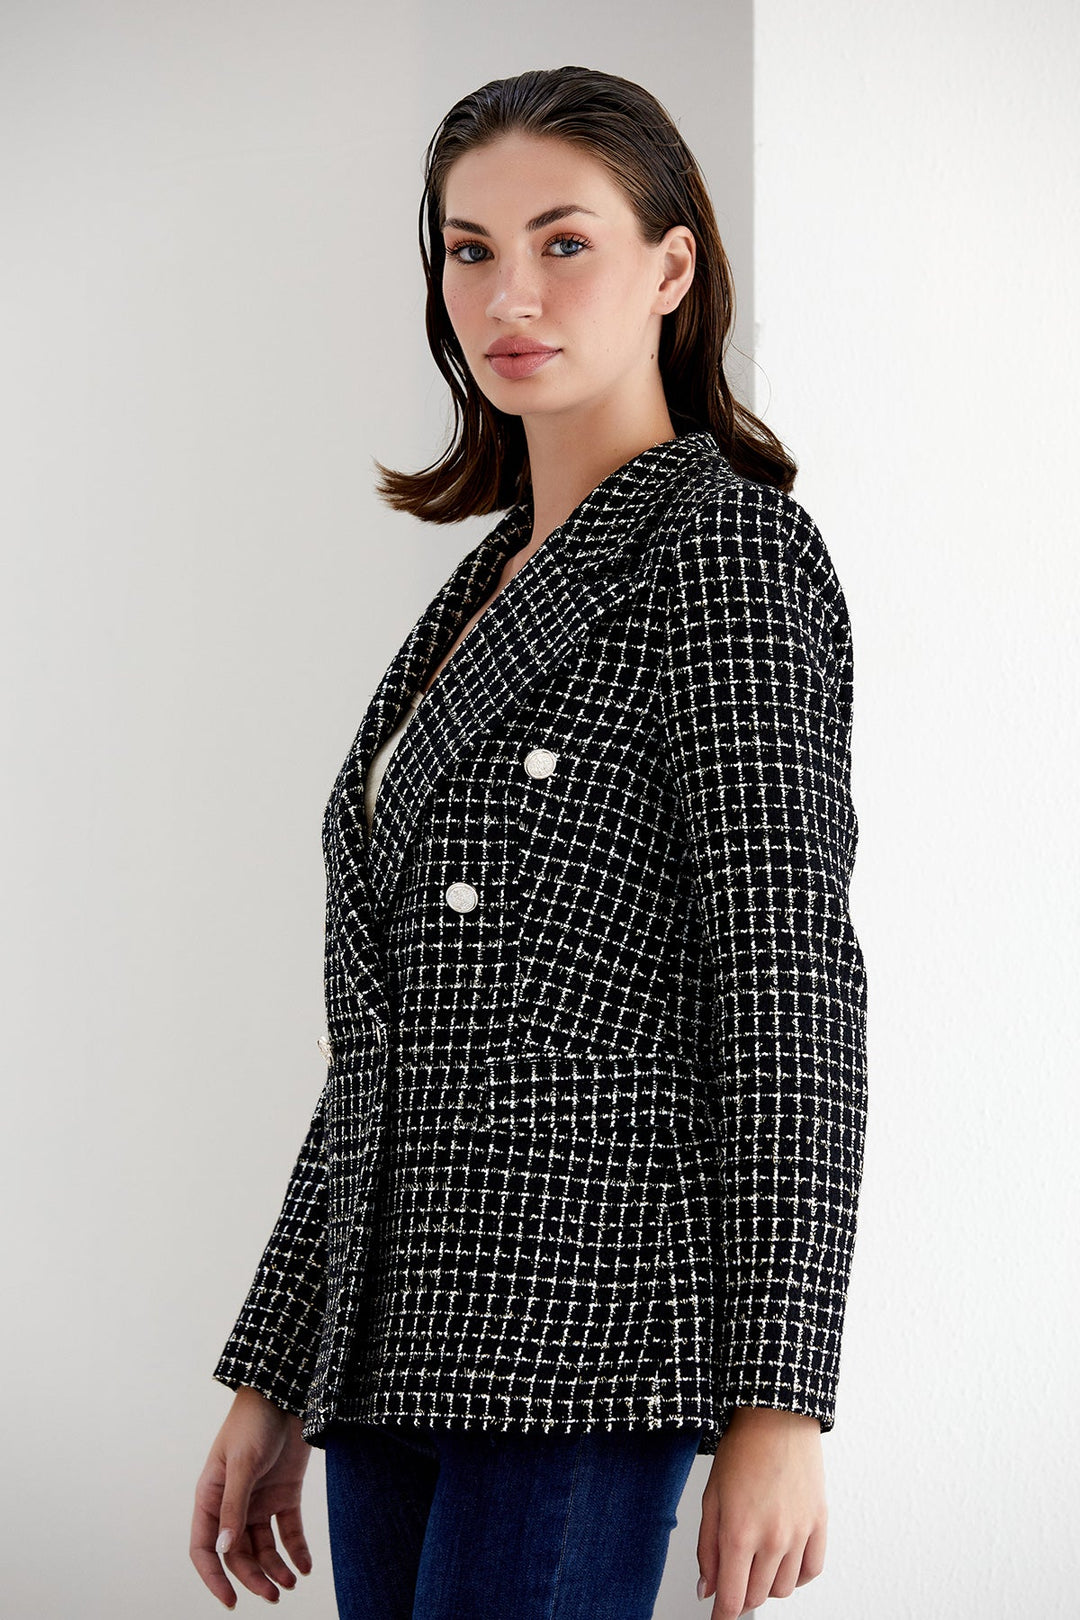 Black/White Check Tweed Double Breasted Blazer